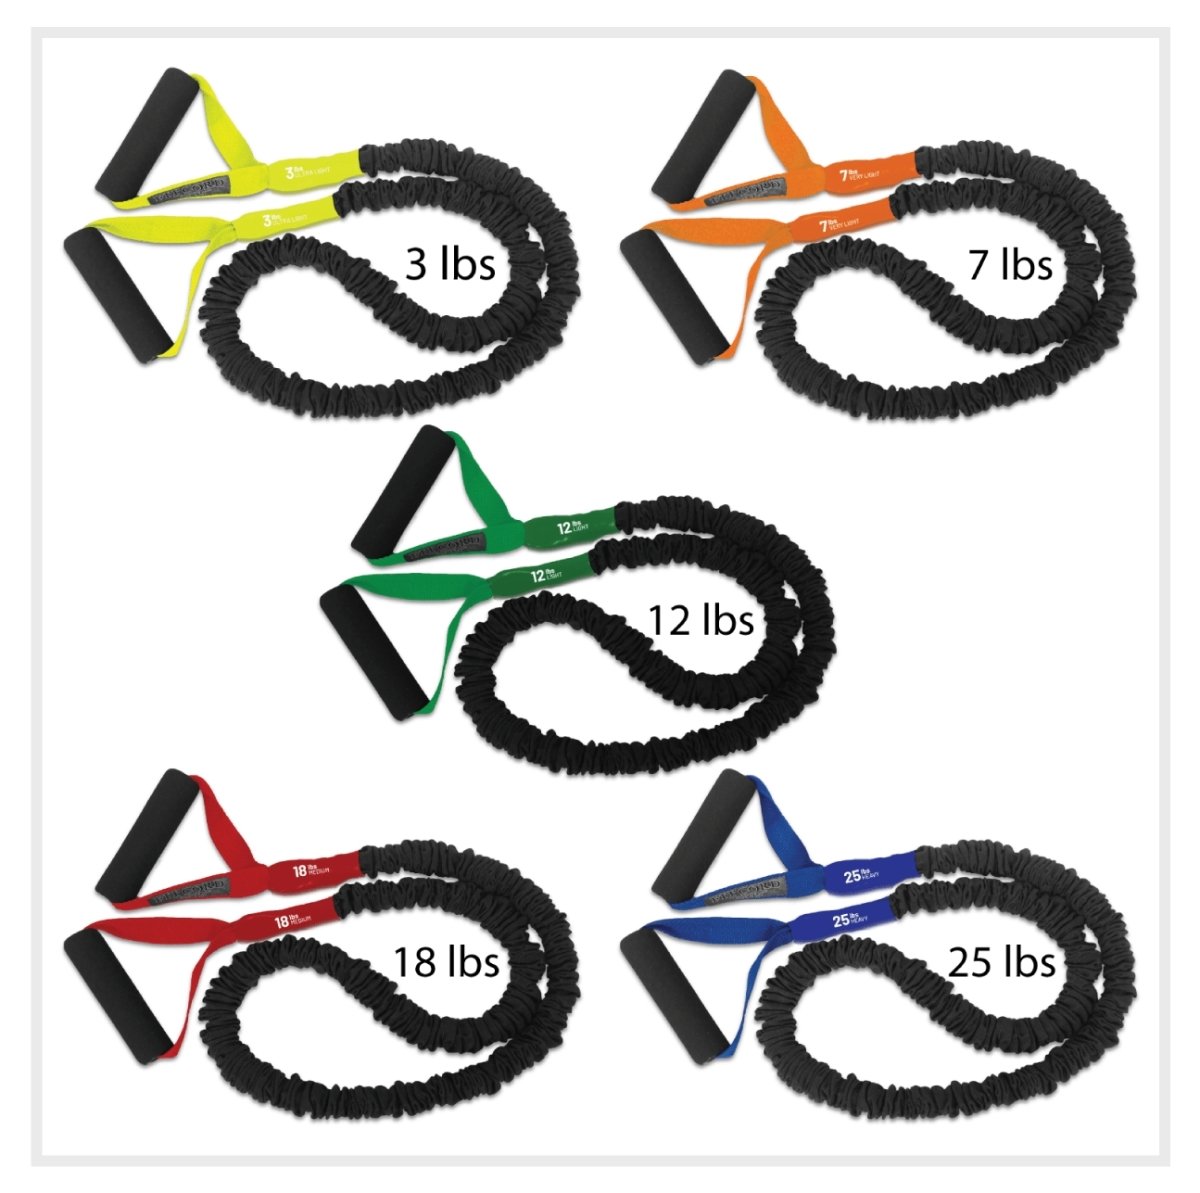 FitCord Resistance Bands 5-Pack (3lb/7lb/12lb/18lb/25lb) best resistance bands made in USA and covered for safety - FitCord Resistance Bands